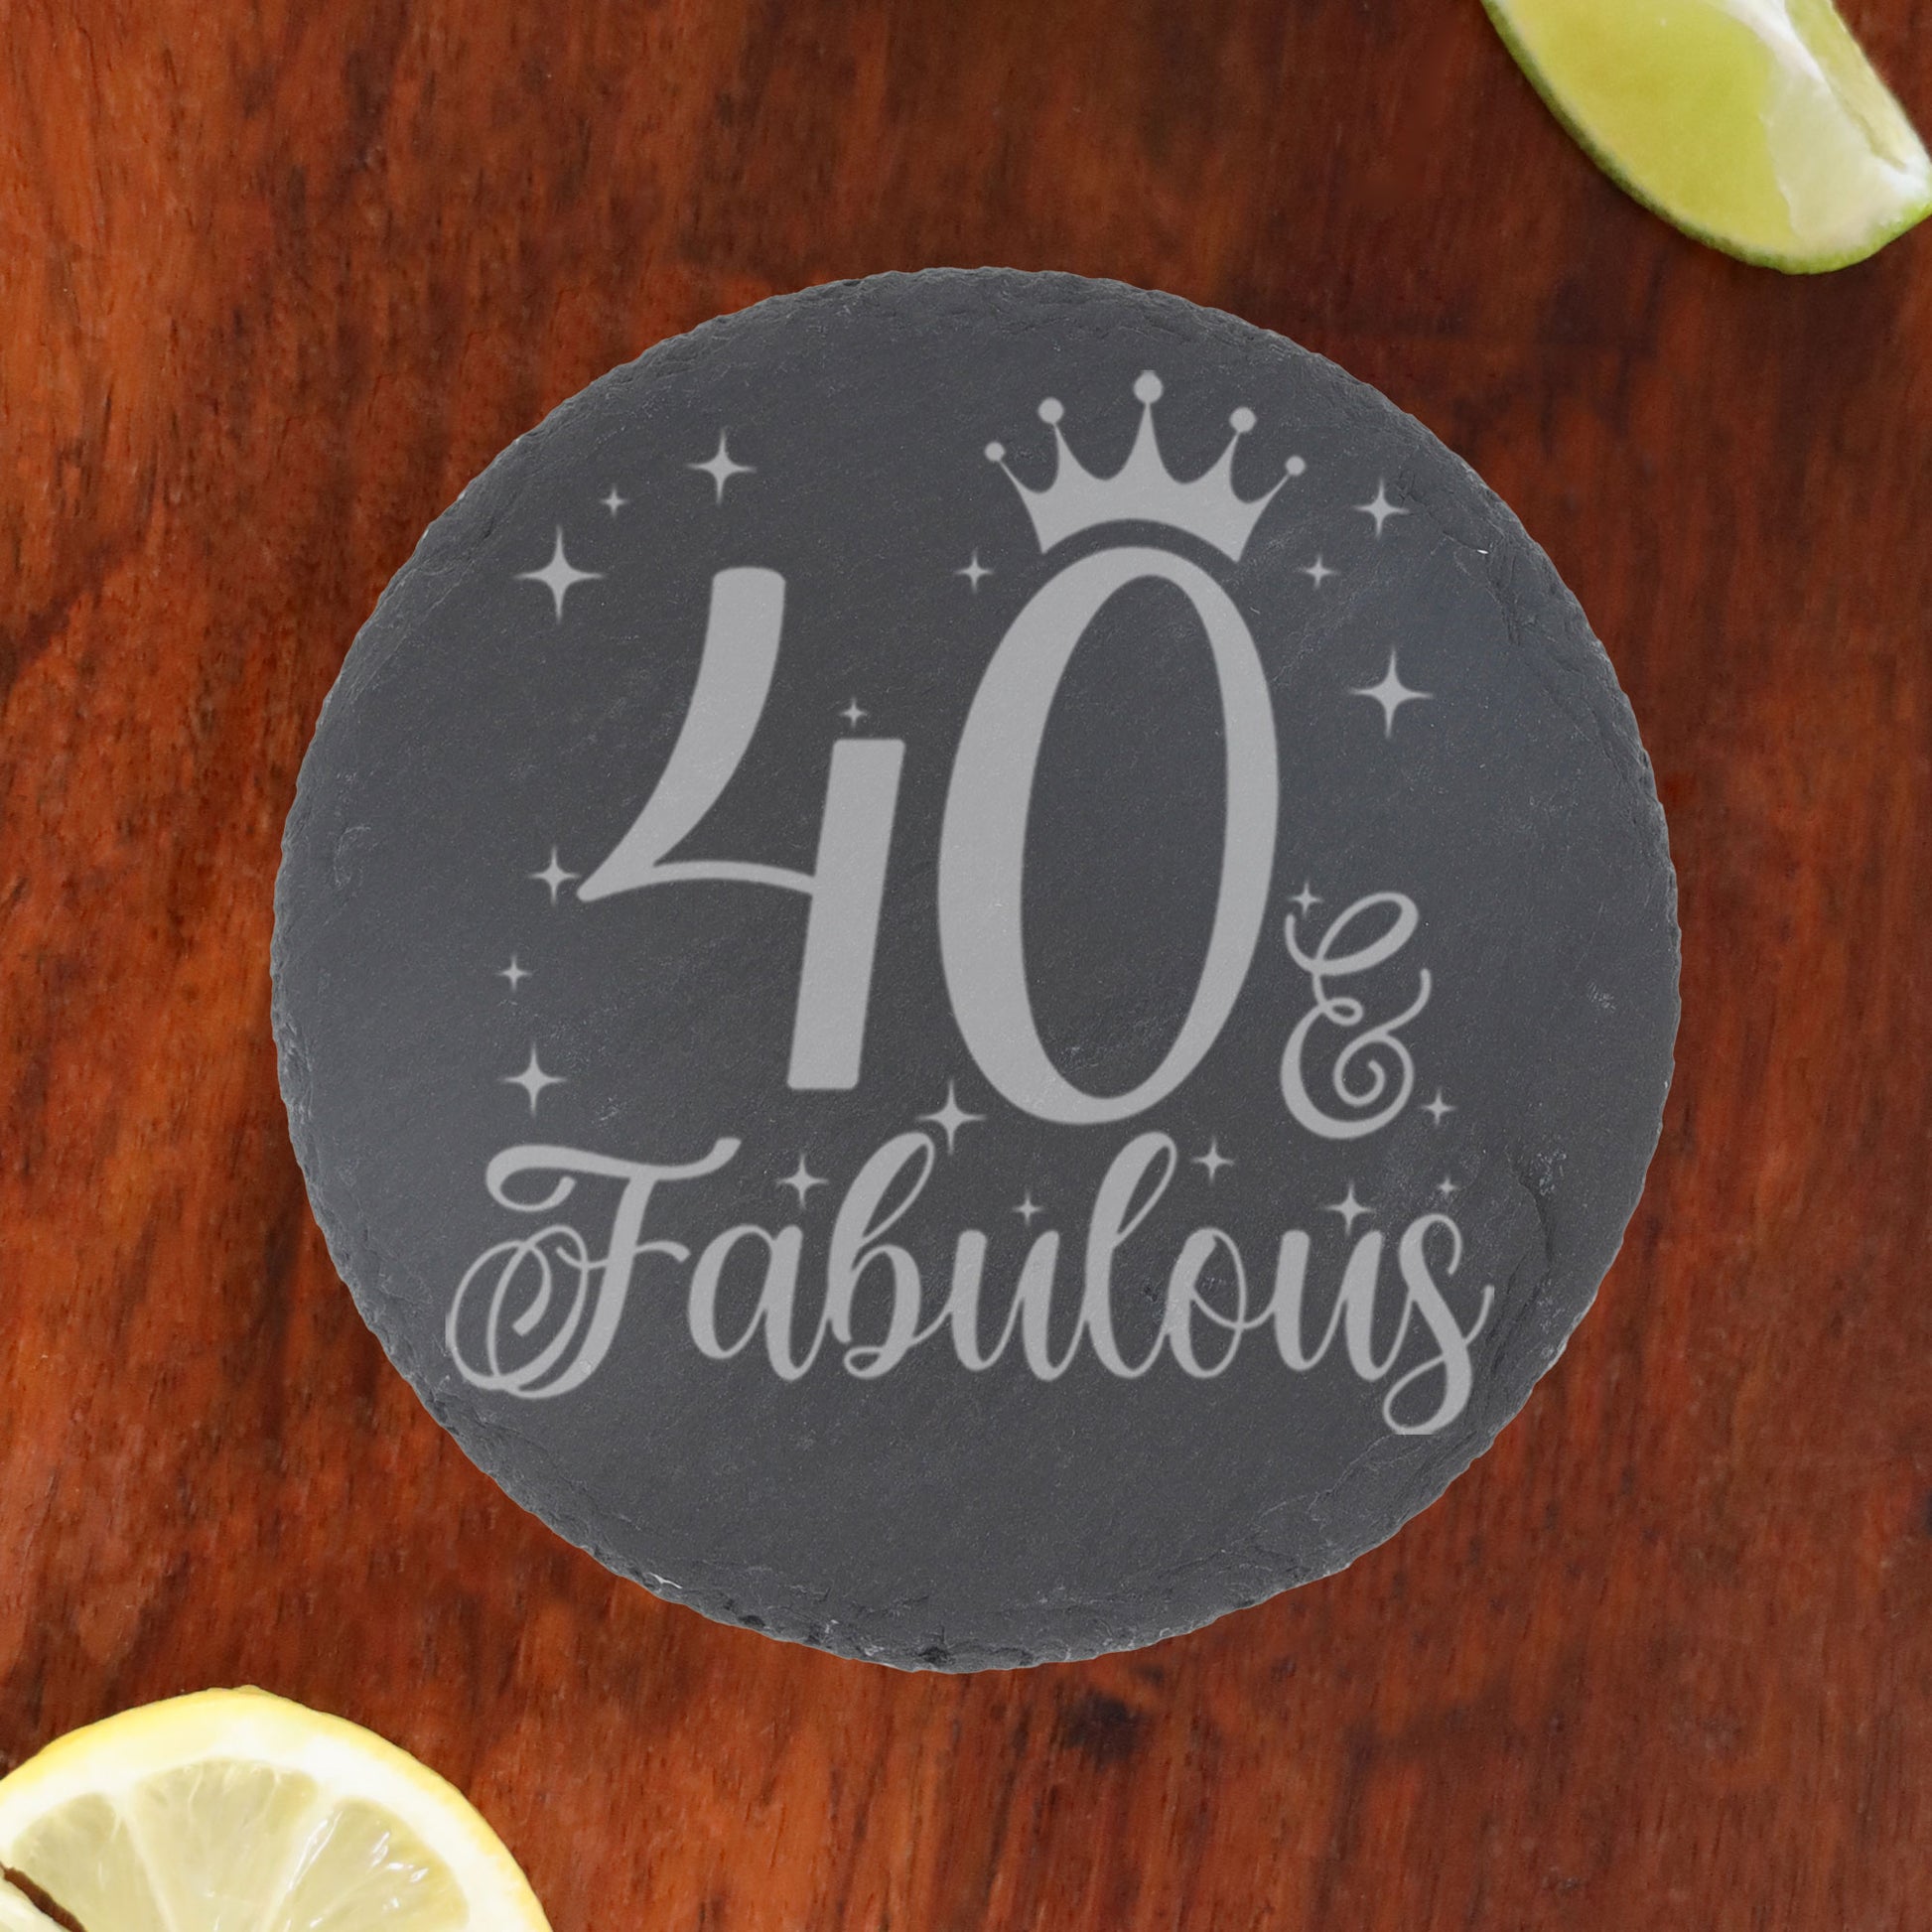 40 & Fabulous 40th Birthday Gift Engraved Wine Glass and/or Coaster Set  - Always Looking Good - Round Coaster Only  